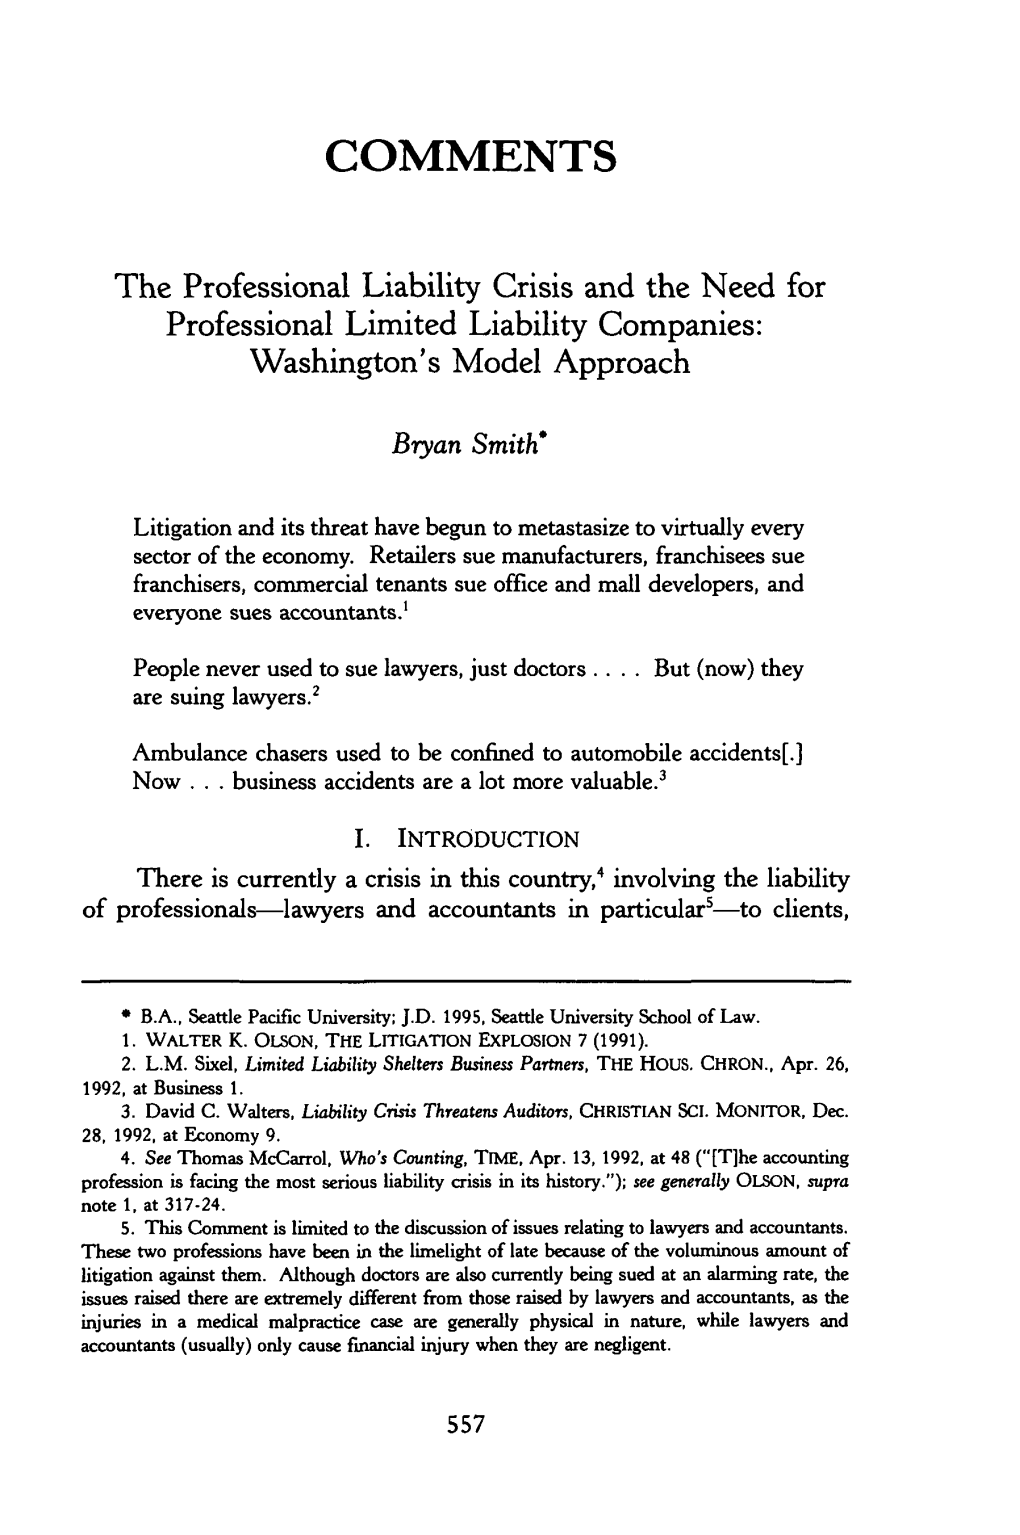 The Professional Liability Crisis and the Need for Professional Limited Liability Companies: Washington's Model Approach